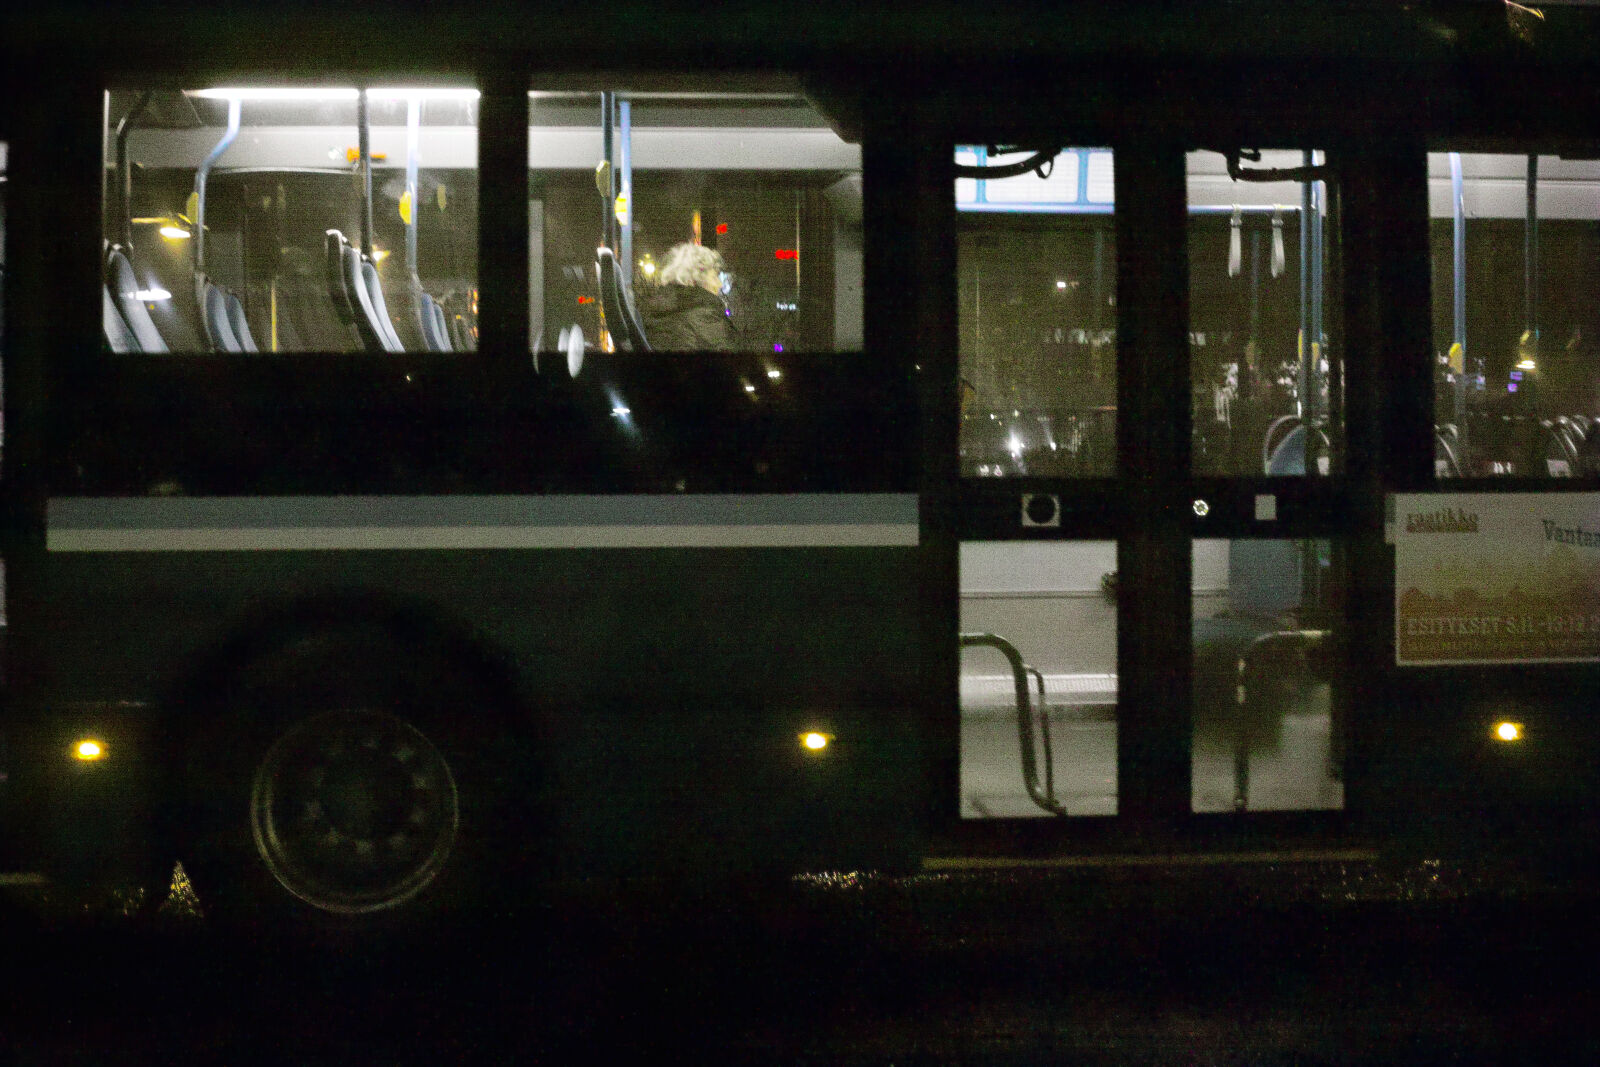 Sigma dp2 Quattro sample photo. Bus of noise photography